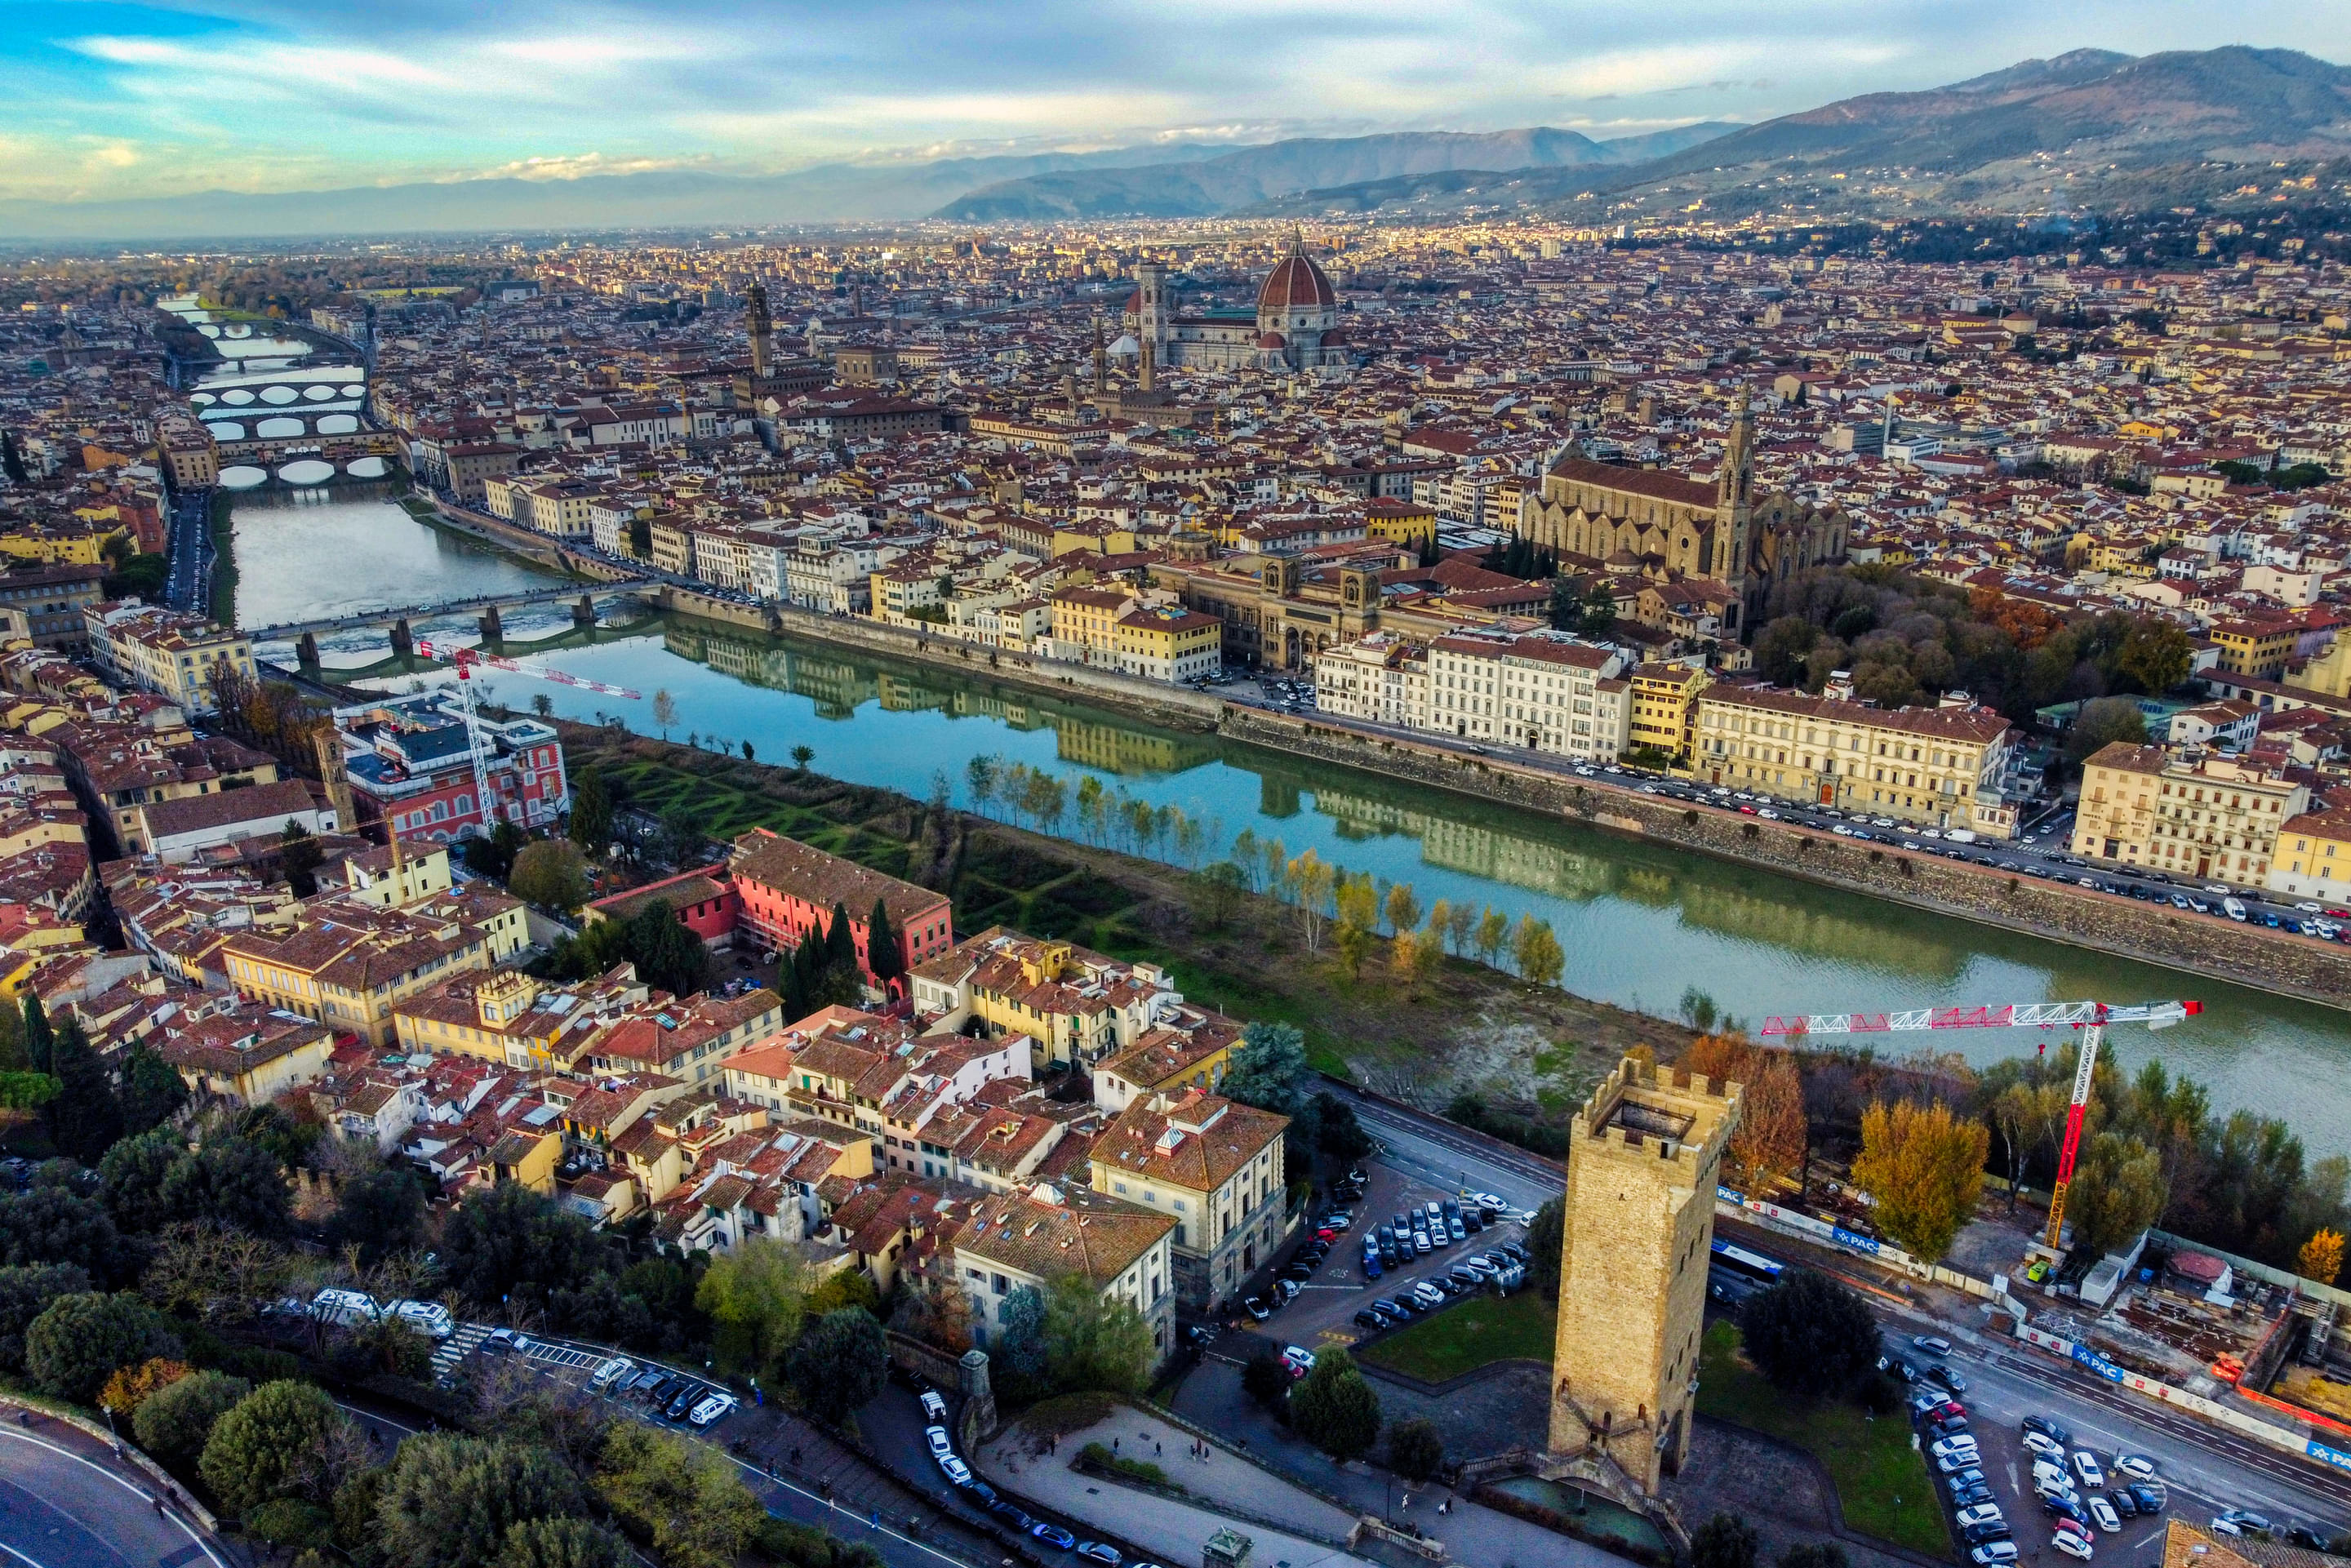 Arno River Overview